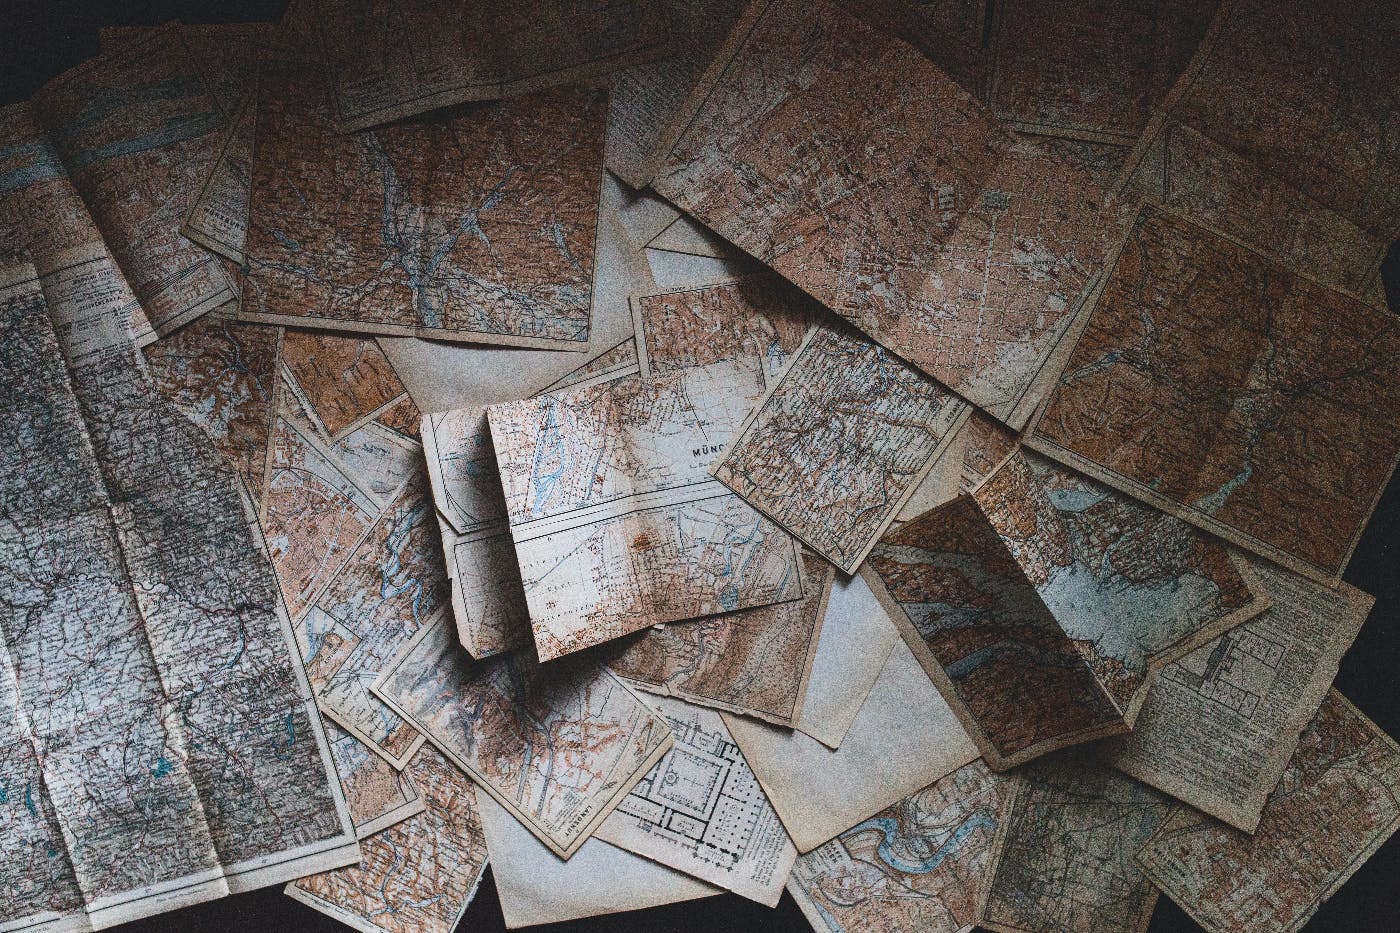 Many old maps